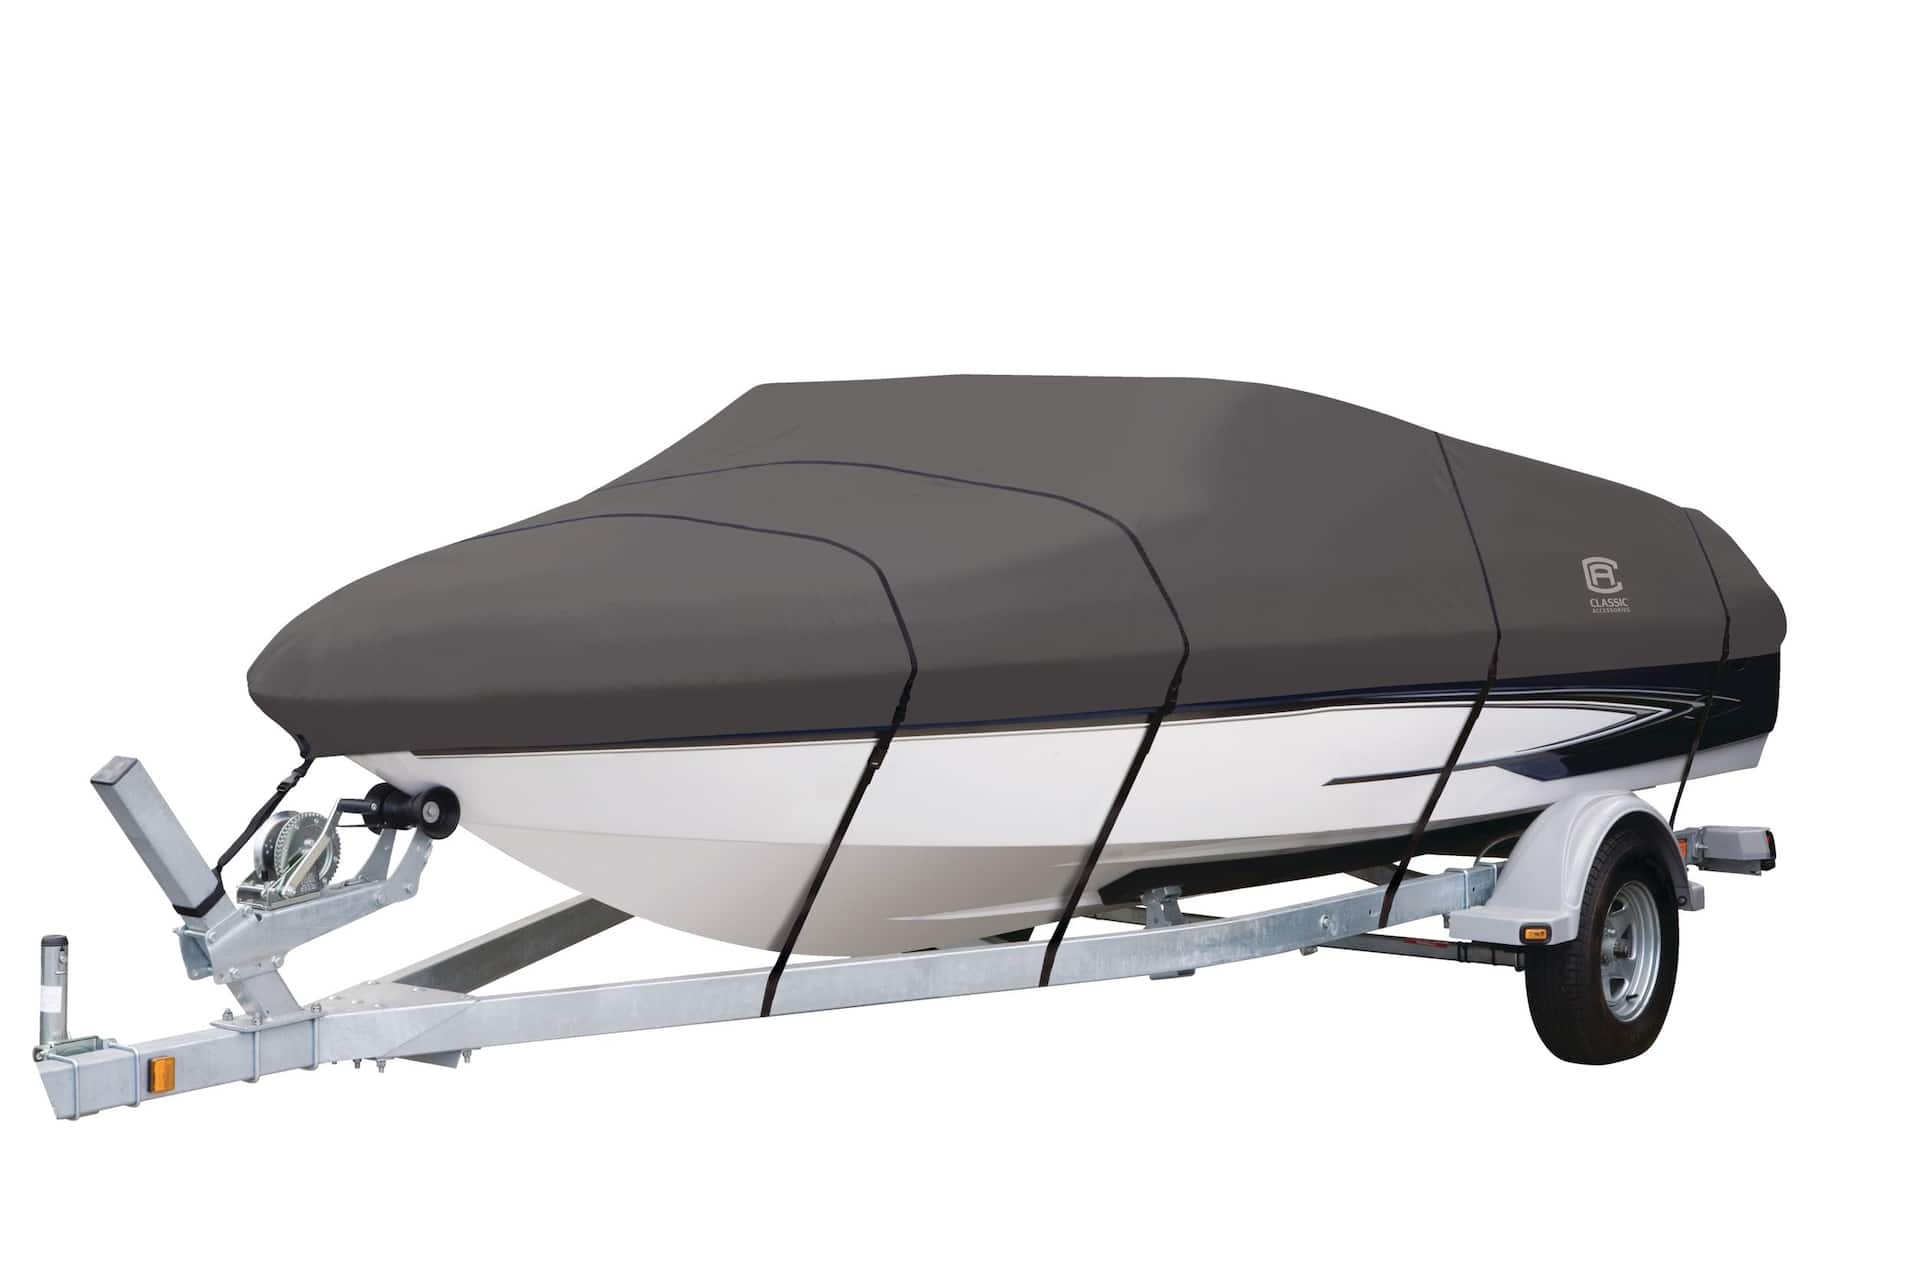 Classic Accessories Northern Lakes XT Heavy-Duty Fabric Boat Cover